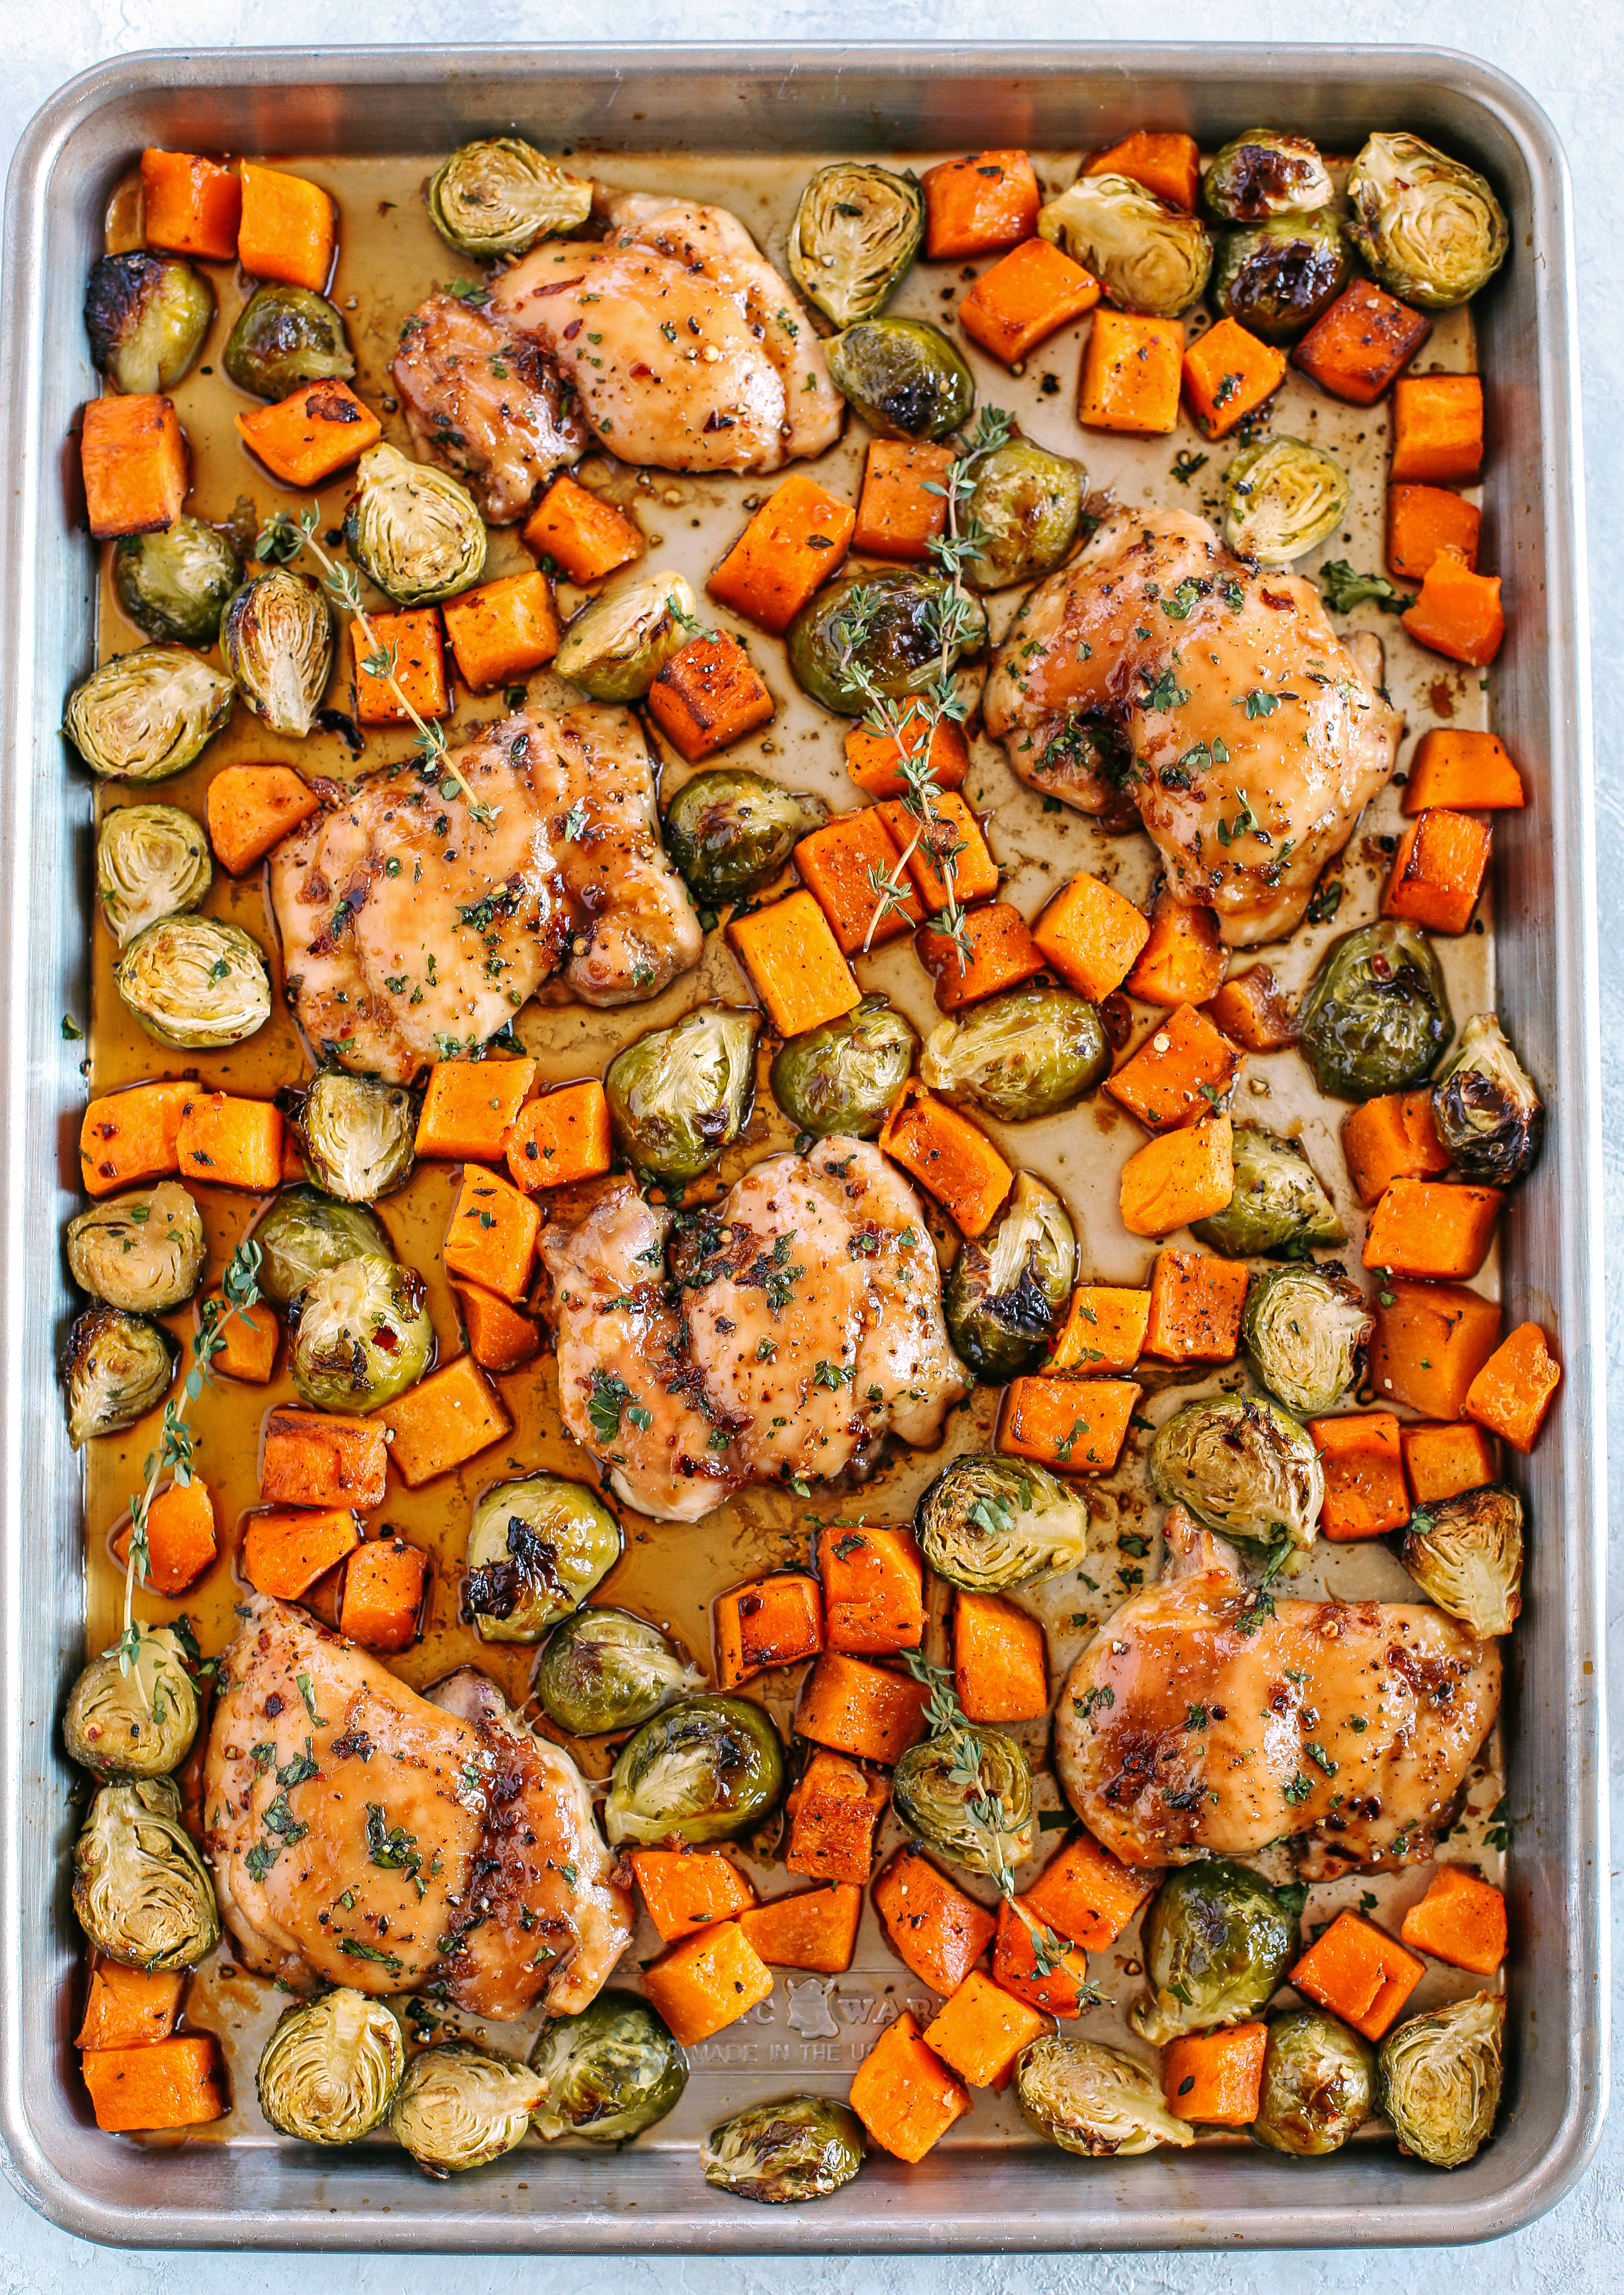 This Sheet Pan Ginger Maple Chicken with Brussels Sprouts and Butternut Squash makes the perfect weeknight dinner that’s healthy, delicious and easily made all on one pan in under 30 minutes!  